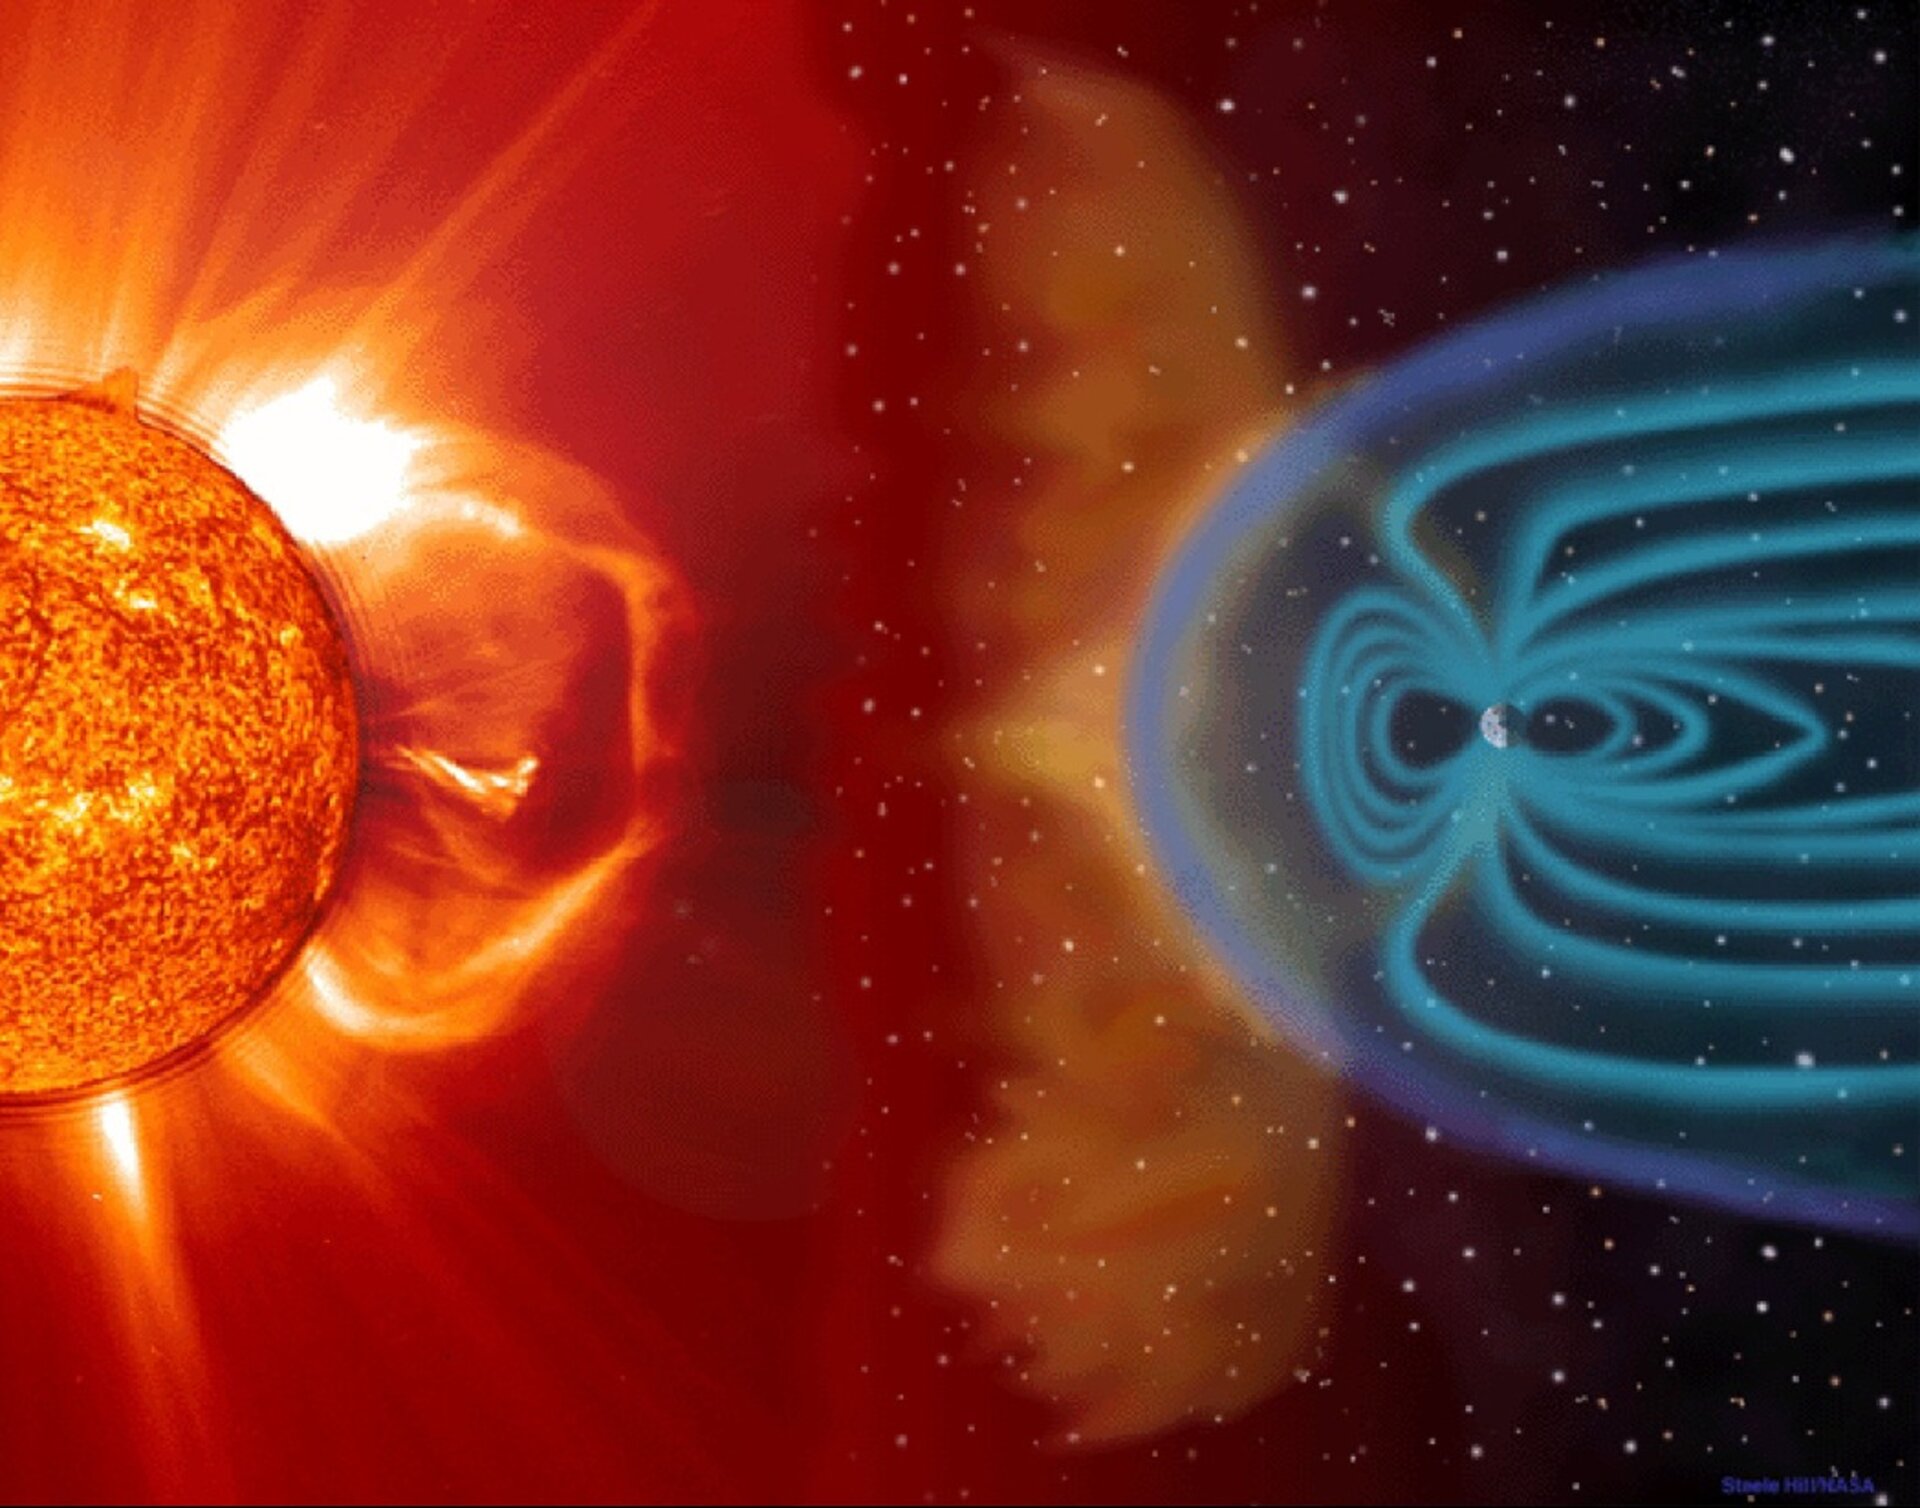 The Sun is a major radiation source